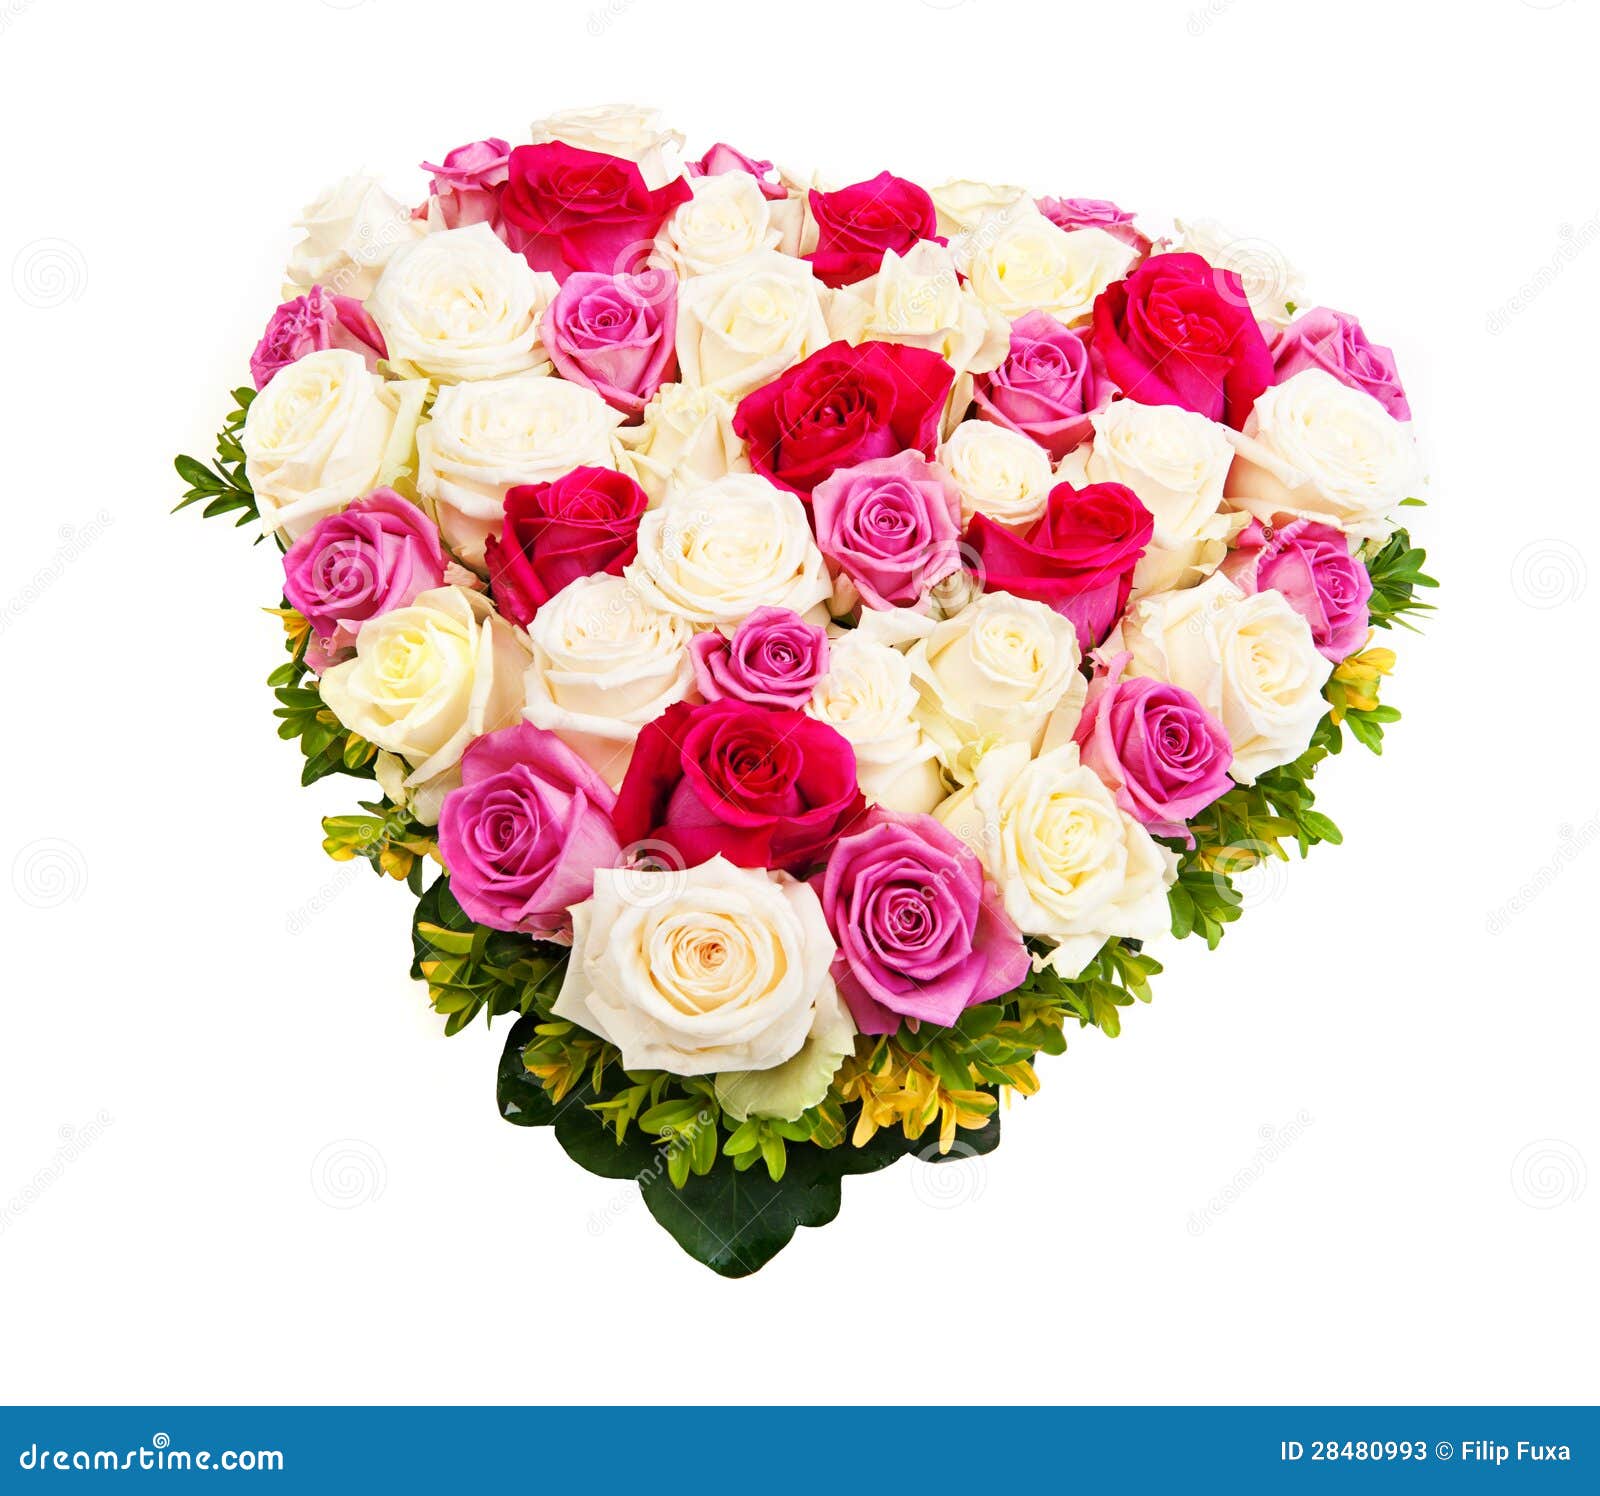 Heart of roses stock image. Image of beauty, beautiful - 28480993